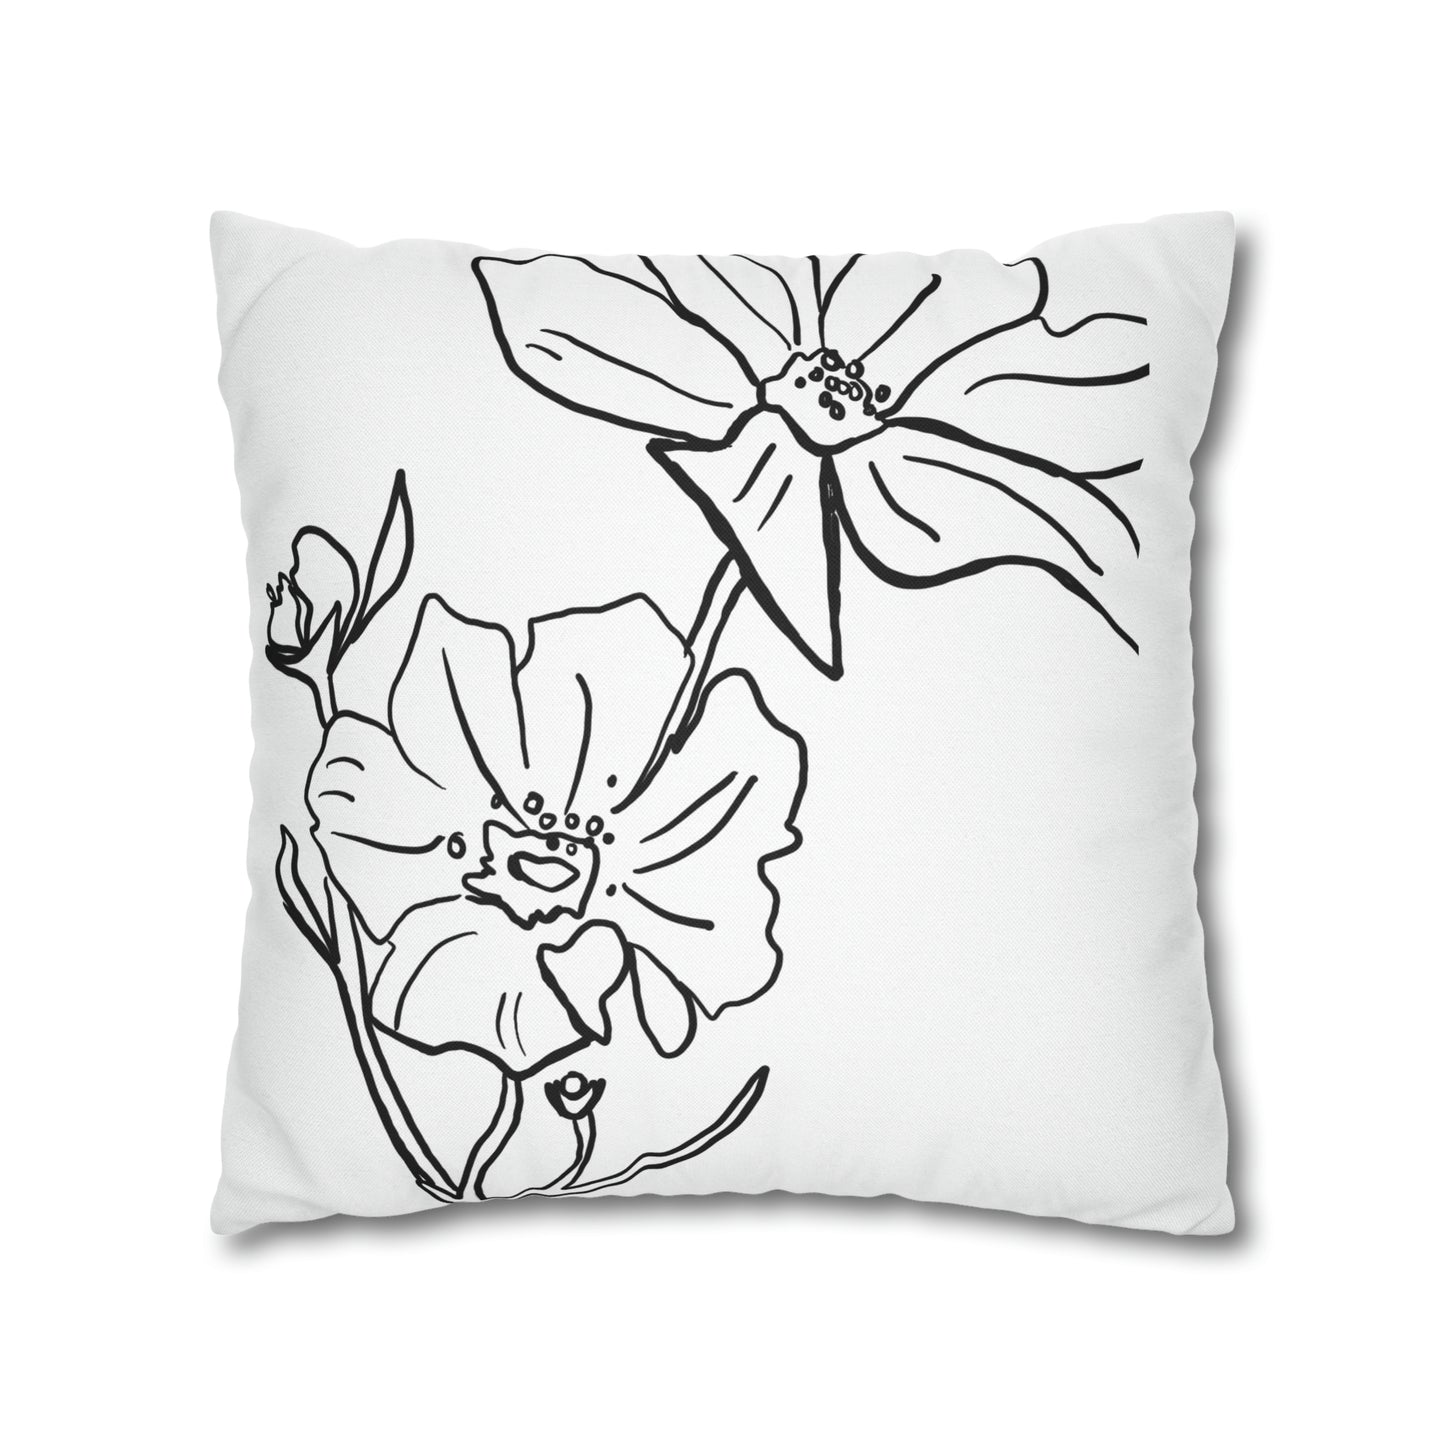 October Birth Flower Double-Sided Pillow Cover